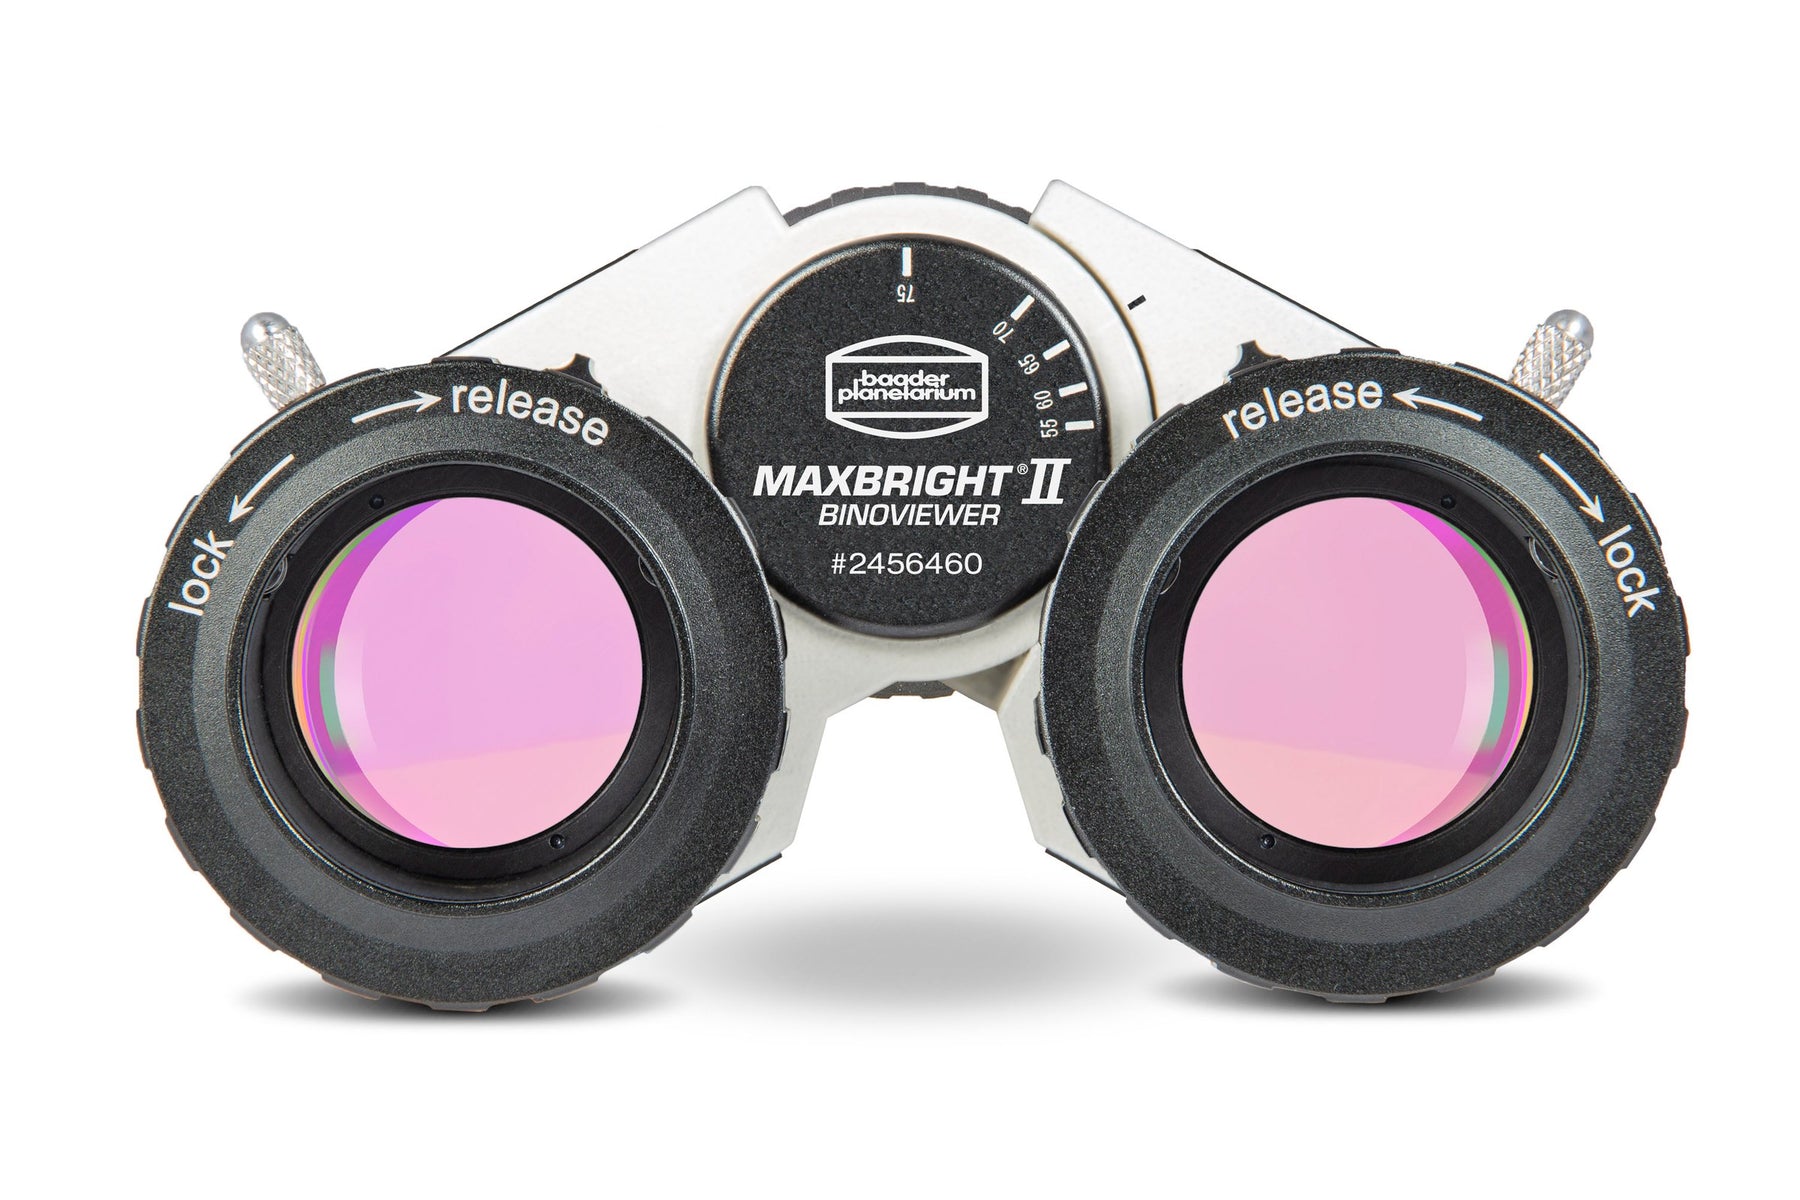 A Review of the new Baader Maxbright Binoviewers